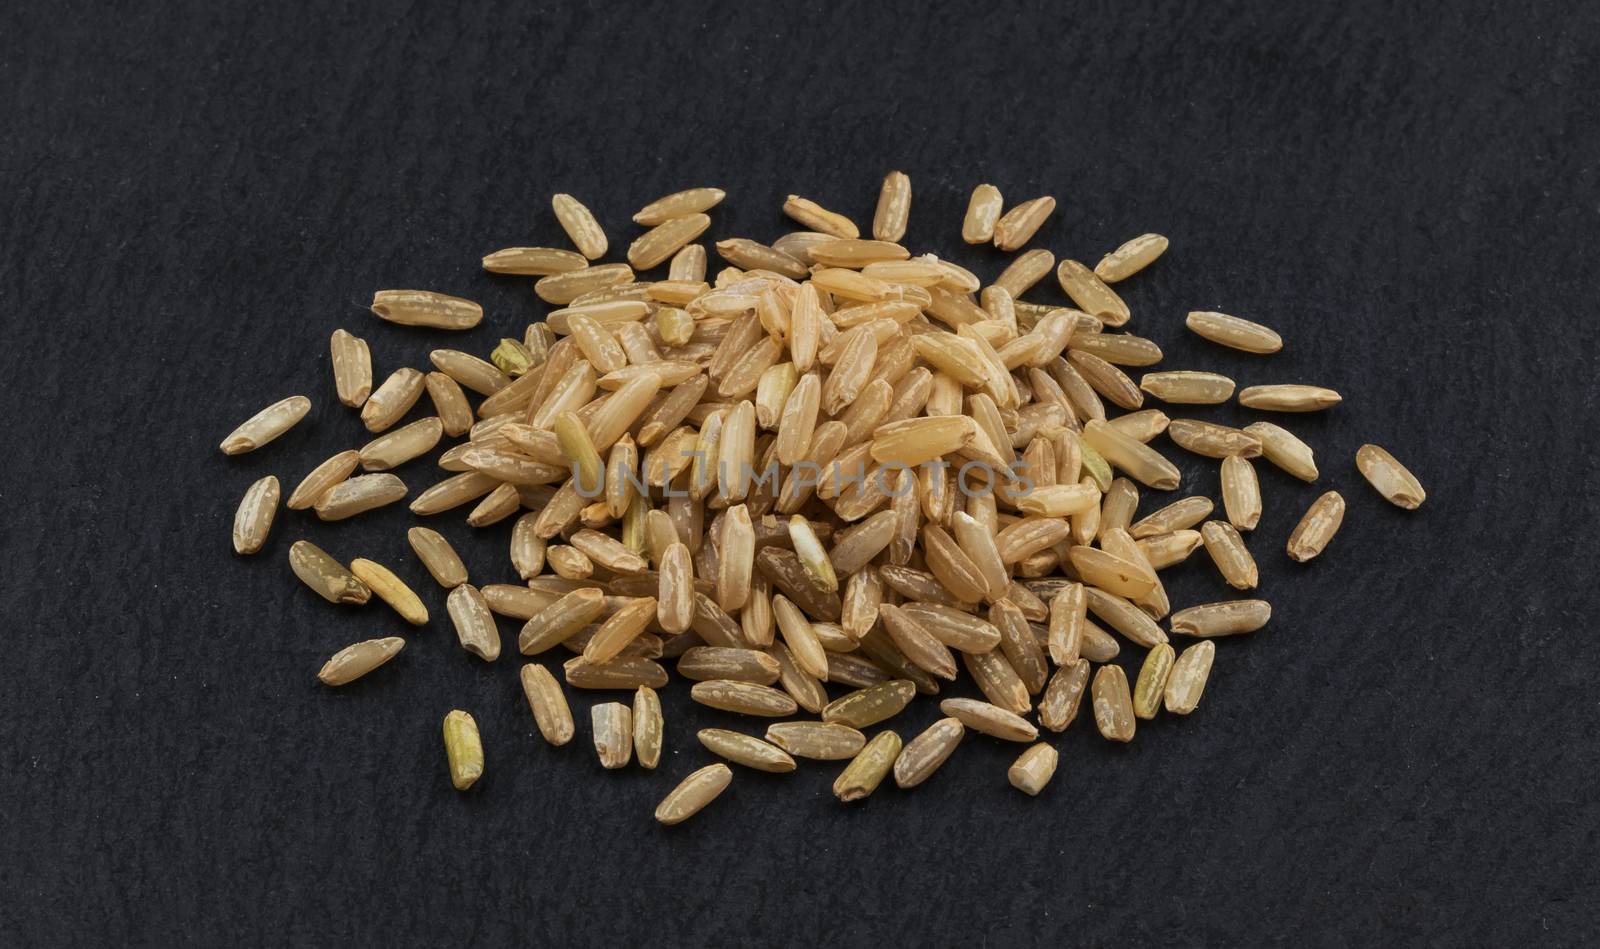 Brown rice groats on black background by xamtiw